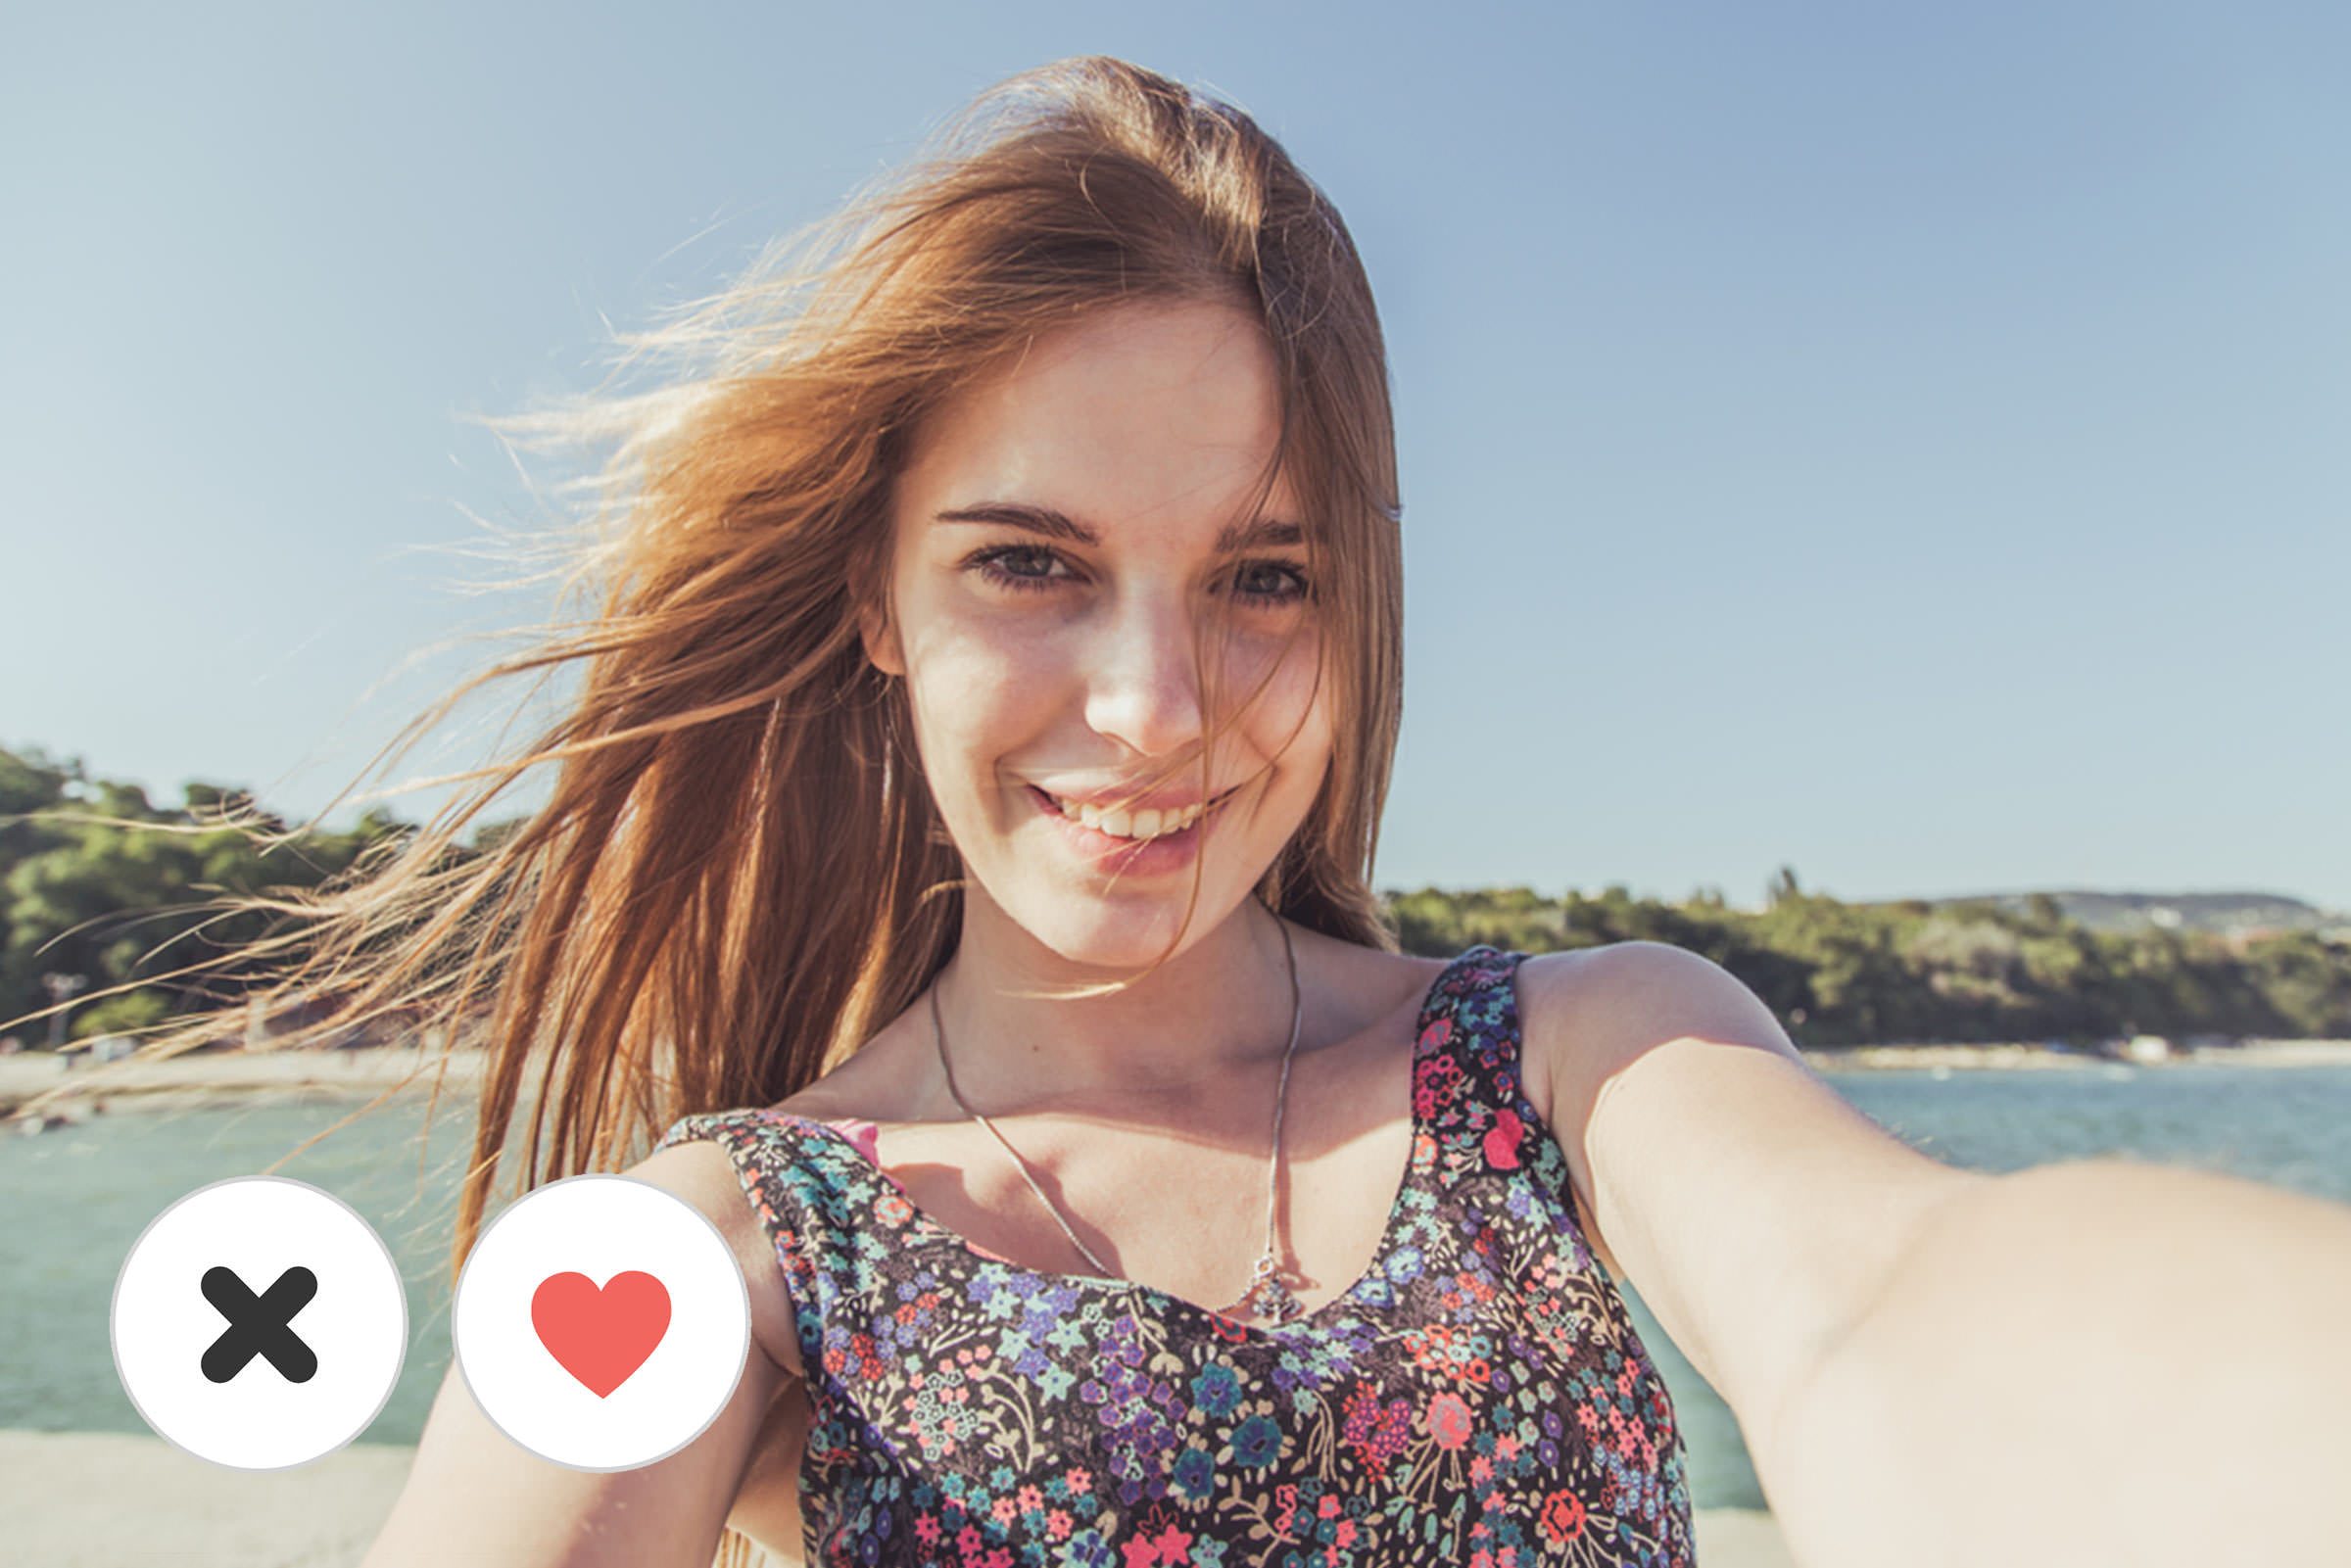 Nine warning signs your Tinder date could be dangerous